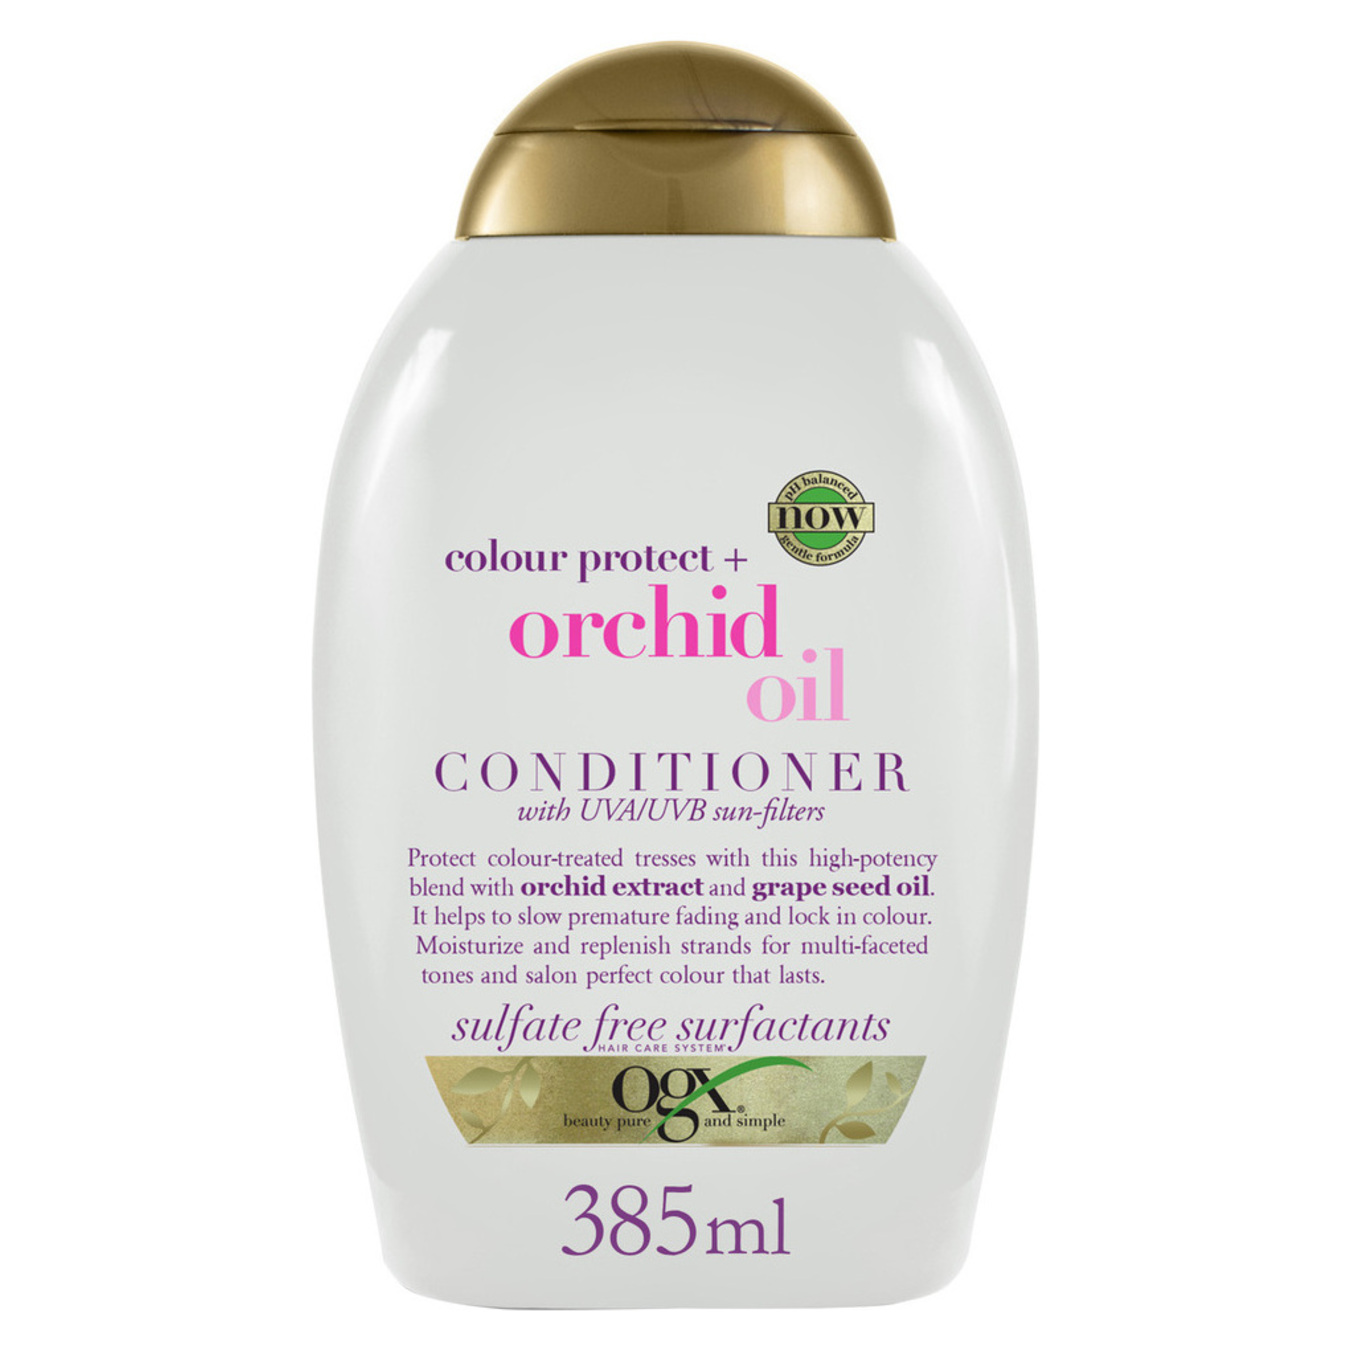 OGX Orchid Oil hair conditioner with orchid oil to protect the color of dyed hair 385 ml